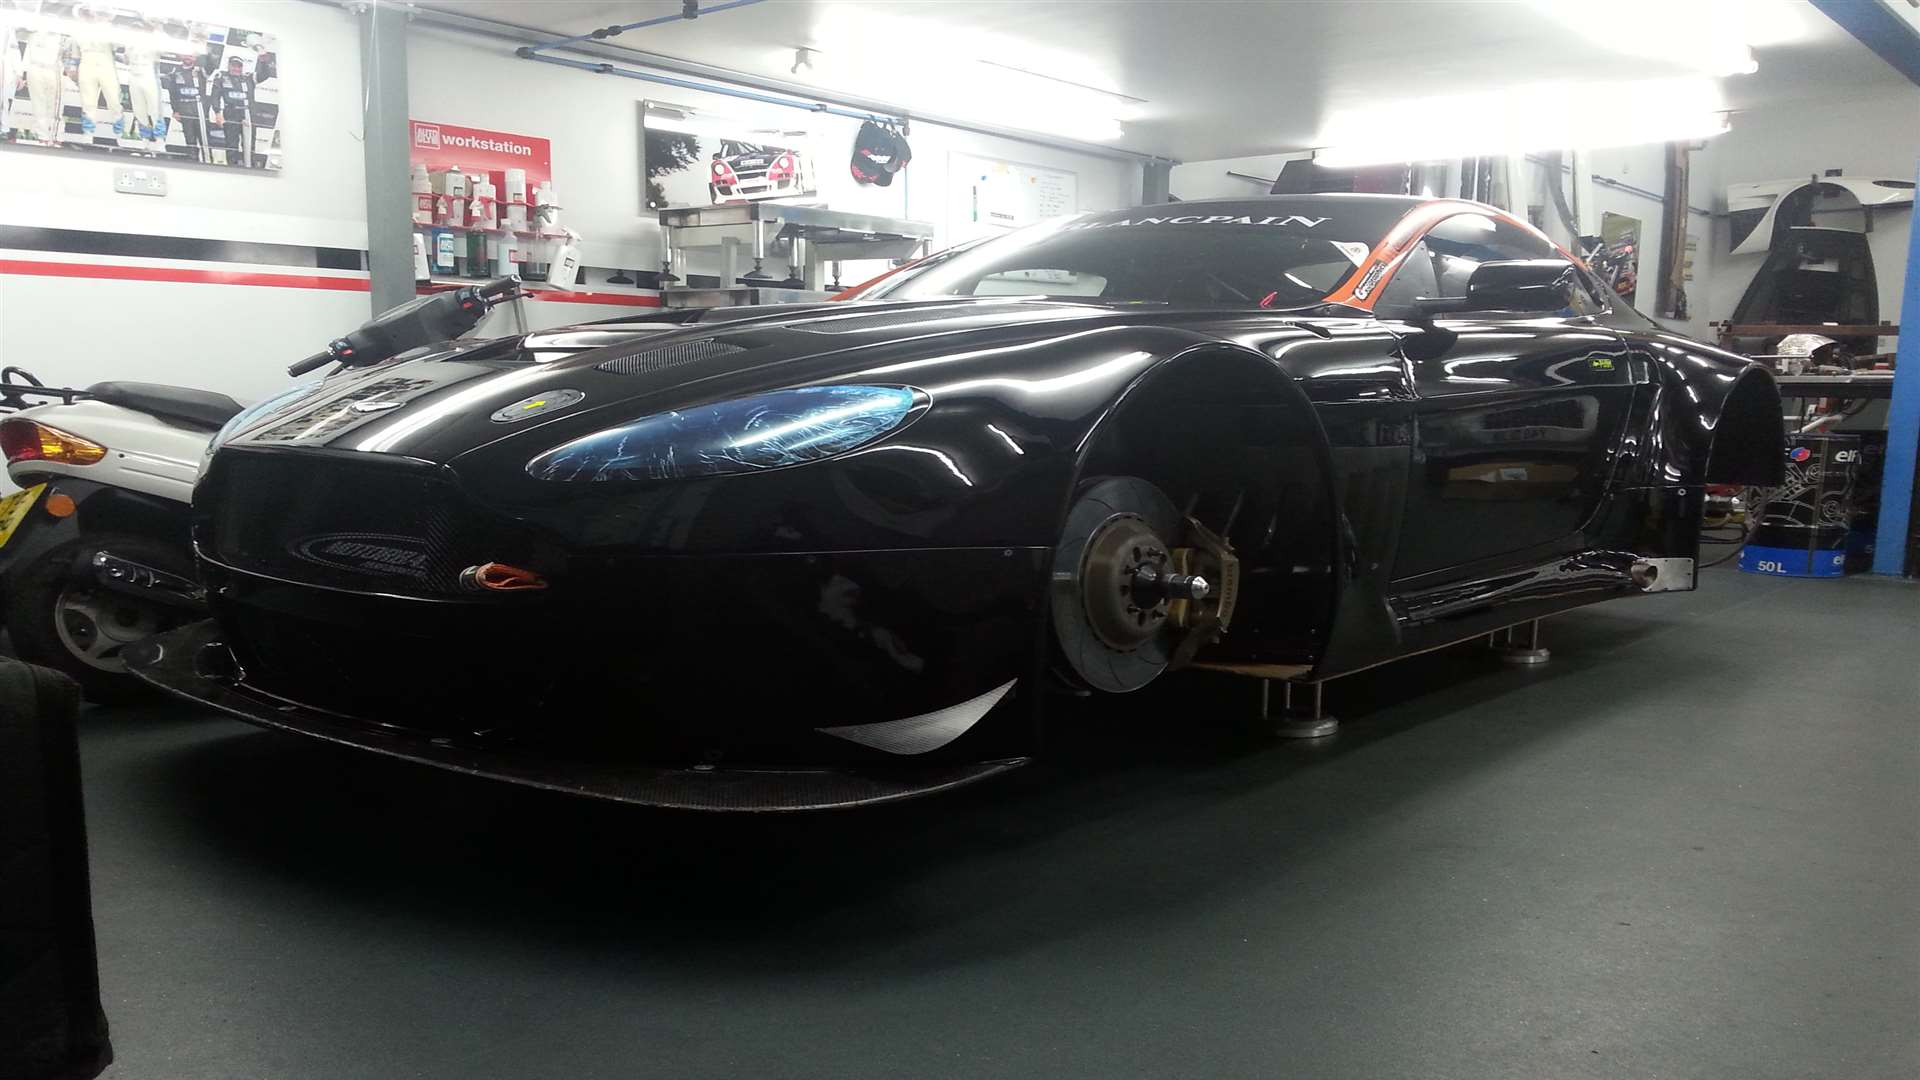 One of the team's Aston Martin GT3 racers